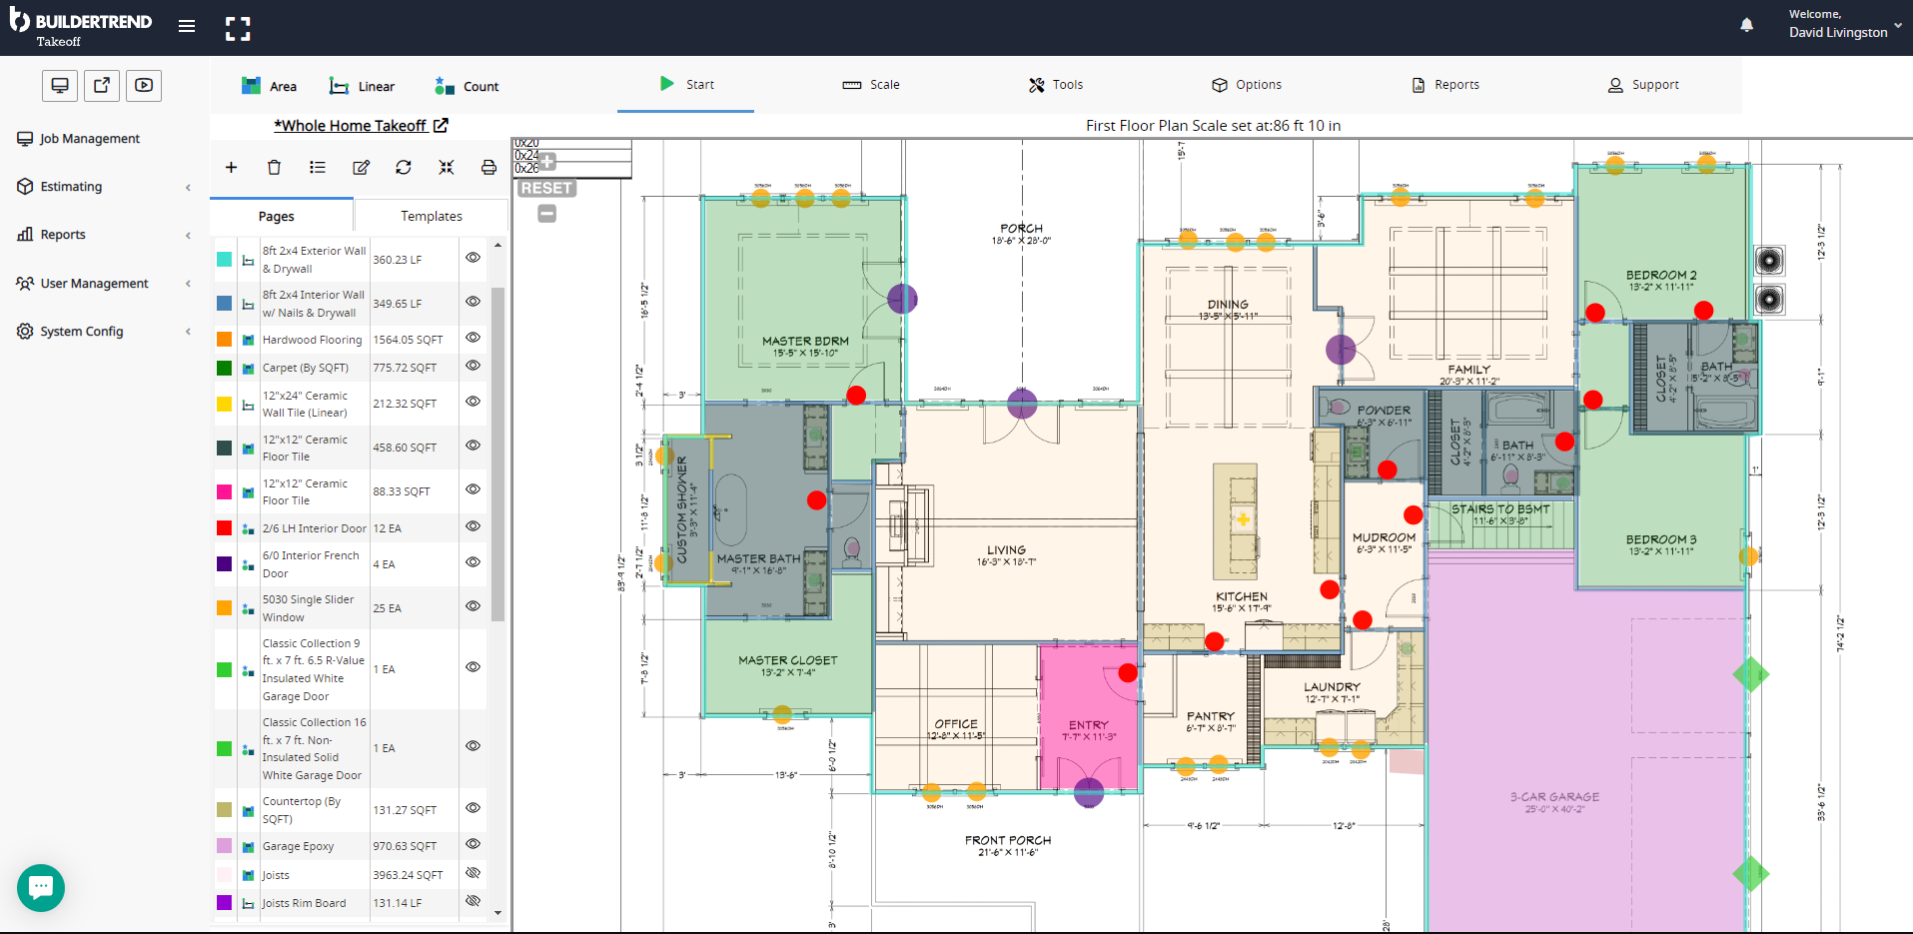 Project Plan in the Buildertrend Software